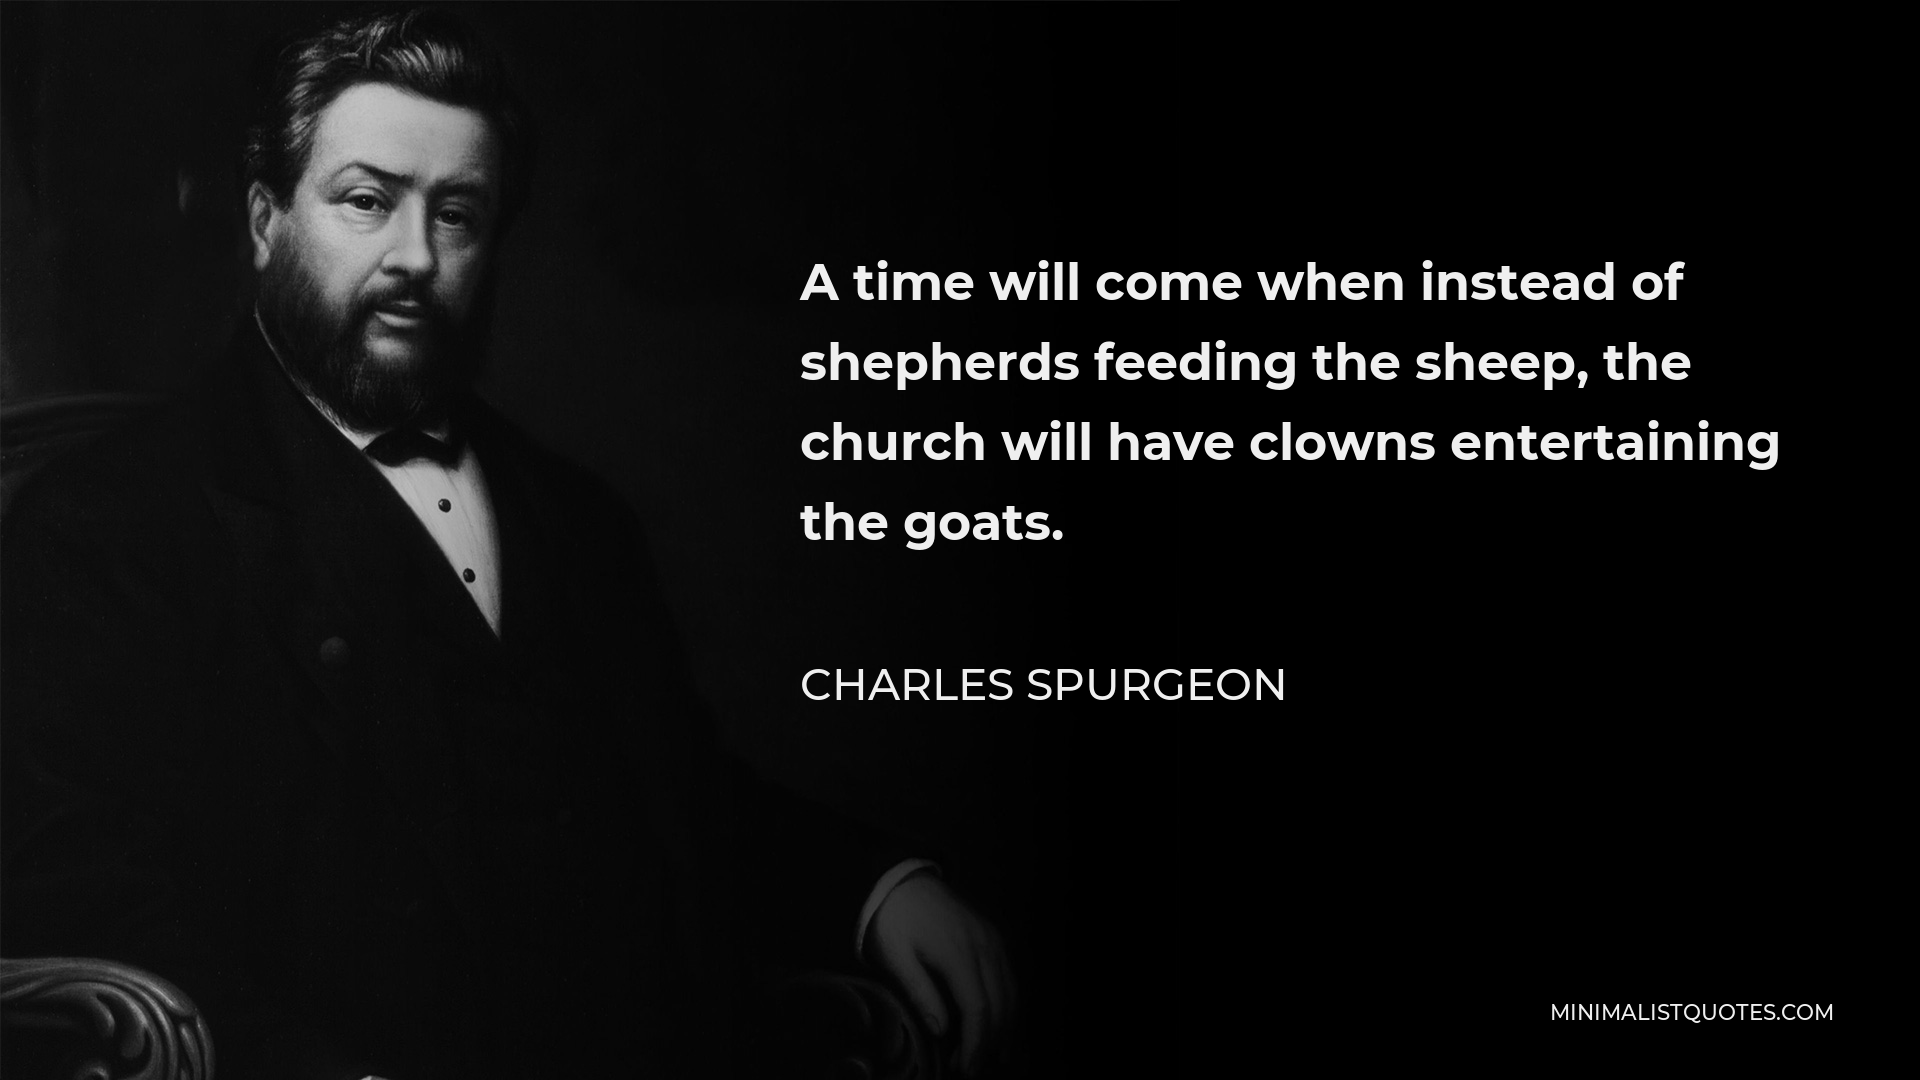 Charles Spurgeon Quote - A time will come when instead of shepherds feeding the sheep, the church will have clowns entertaining the goats.